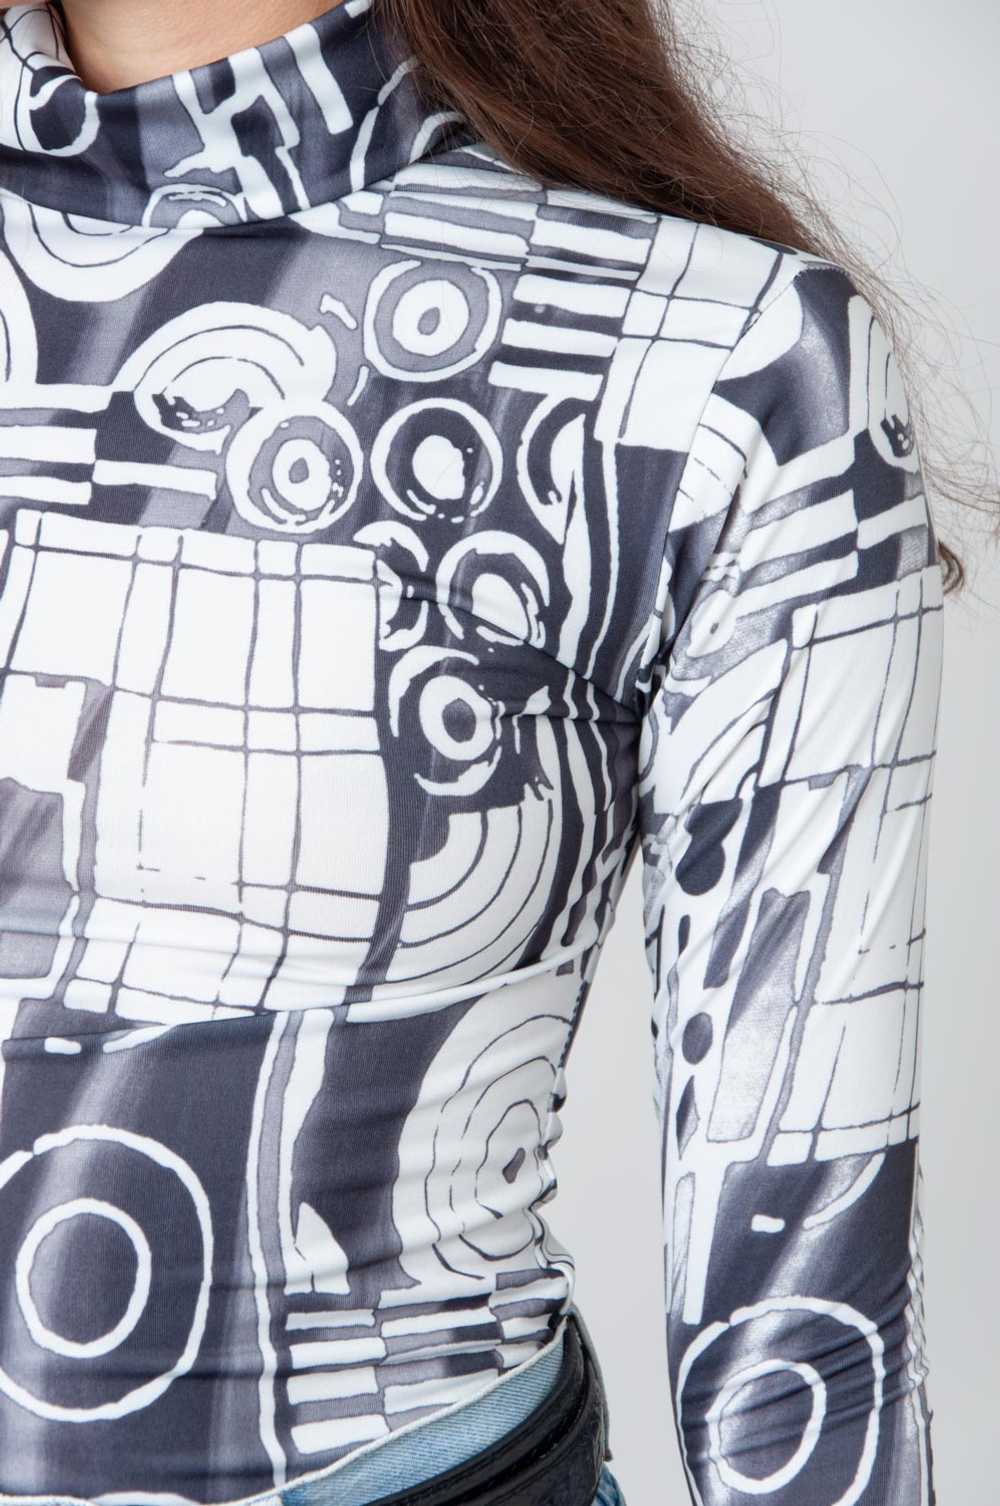 Psychodelic Dream Black and white roll neck top - image 1